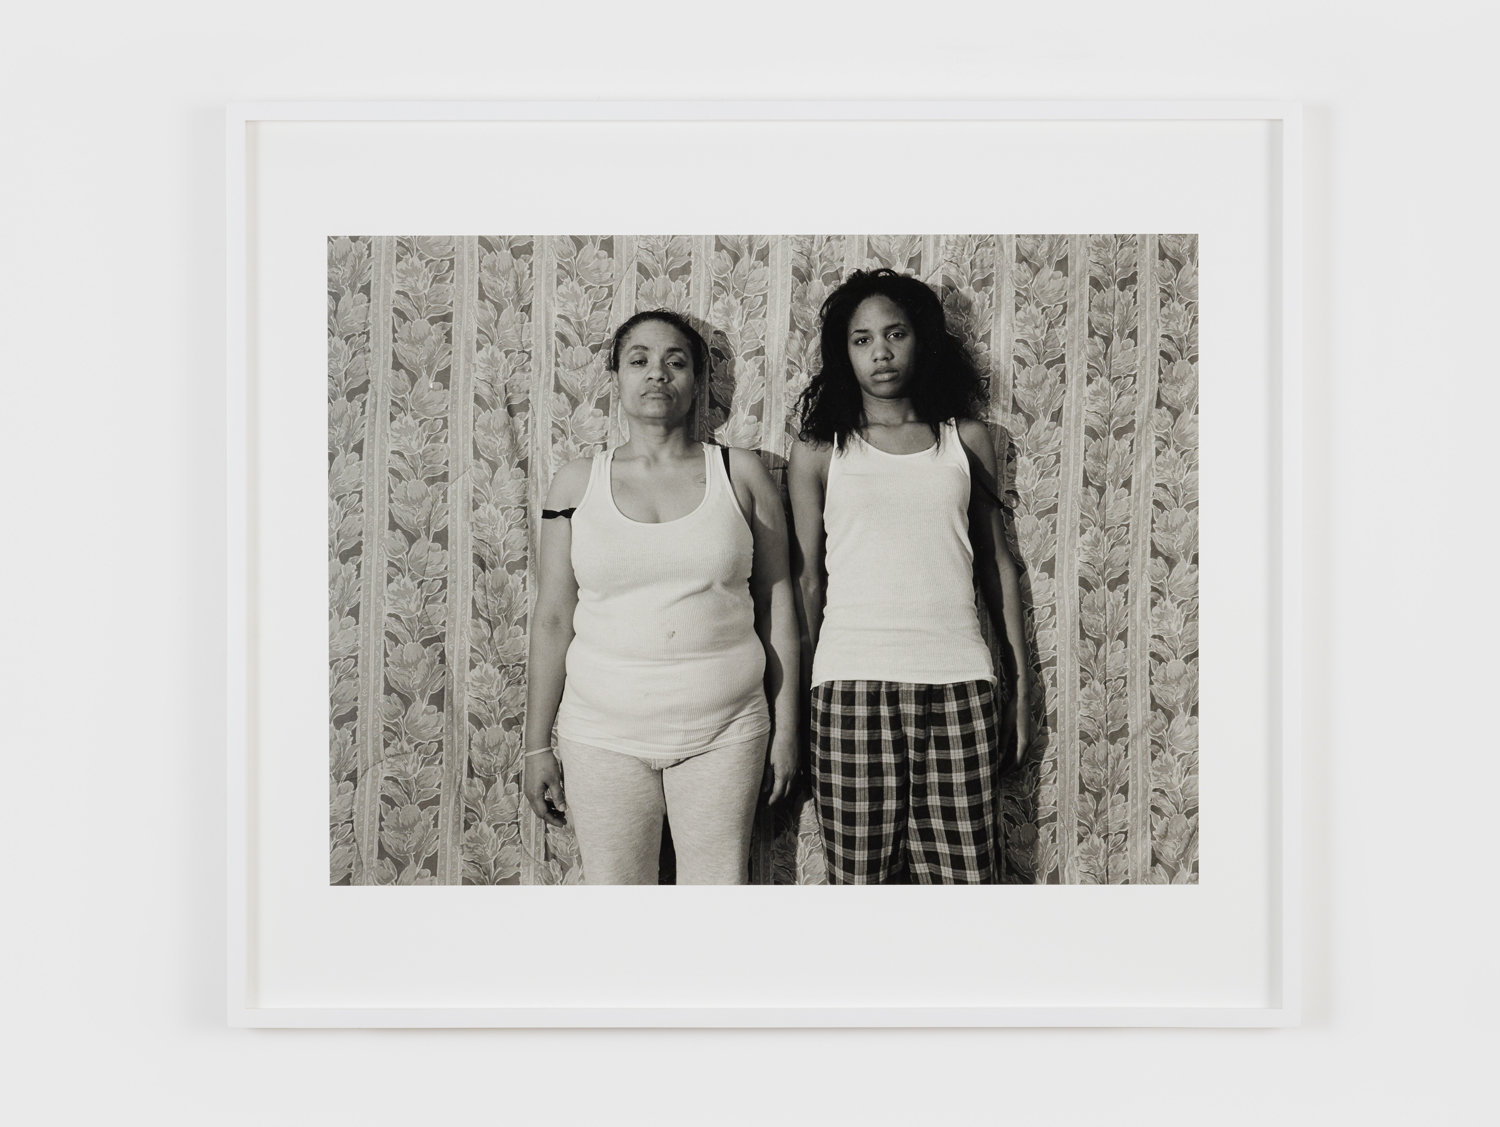 The Lehman College Art Gallery’s latest exhibition, ‘Young, Gifted and Black,’ brings together works by artists of African descent, including this photograph, ‘Momme Floral Comforter,’ by Latoya Ruby-Frazier.